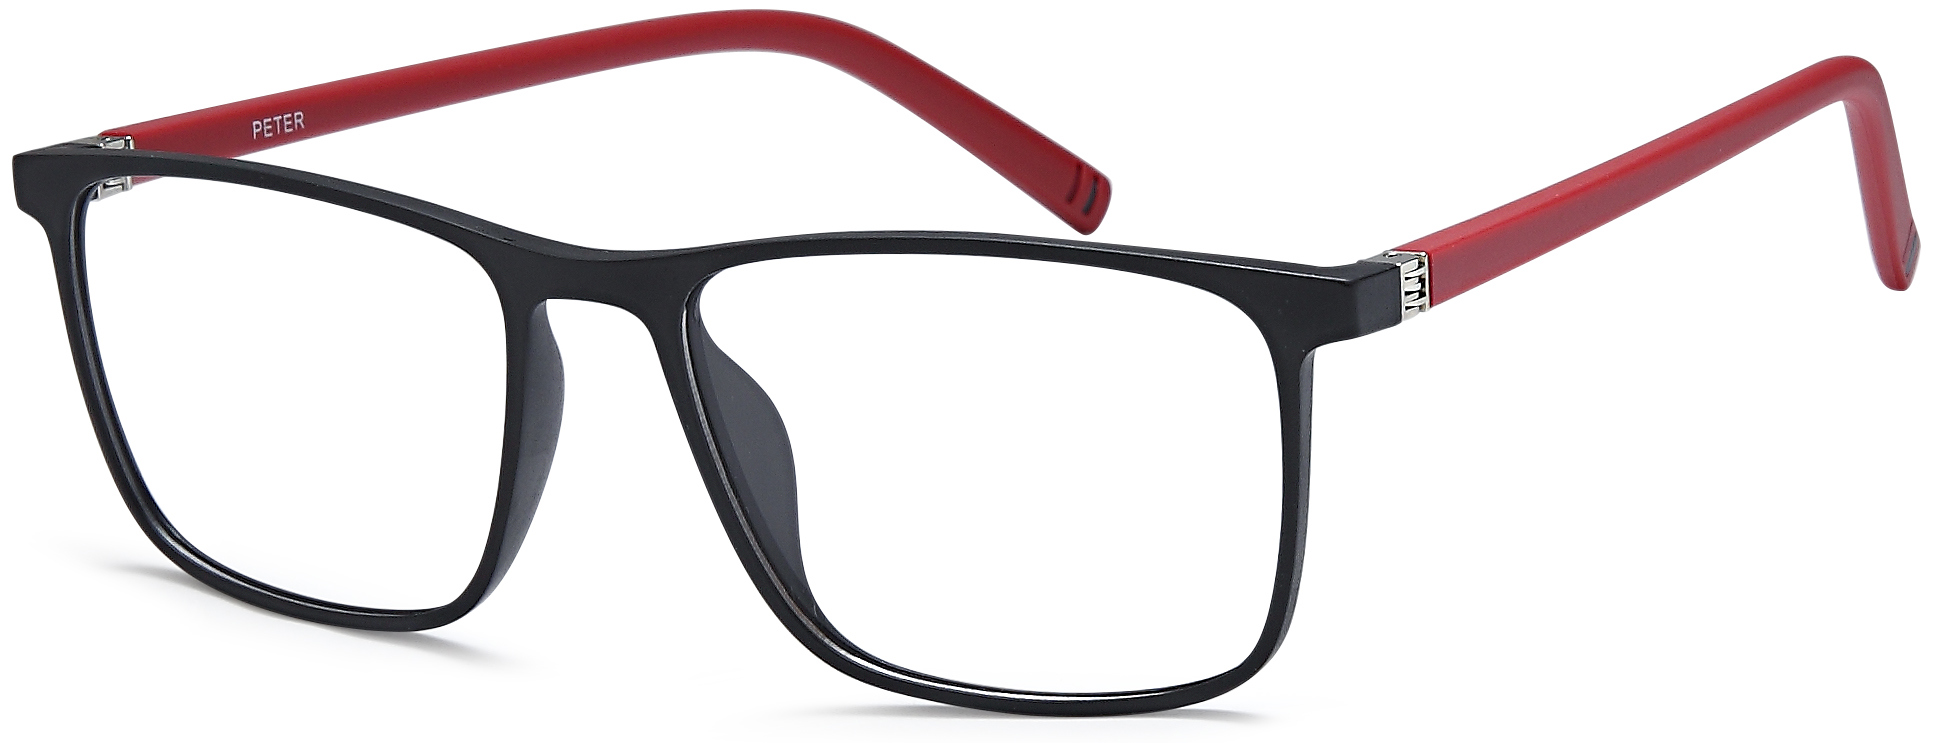 Picture of Millennial Eyeglasses PETER